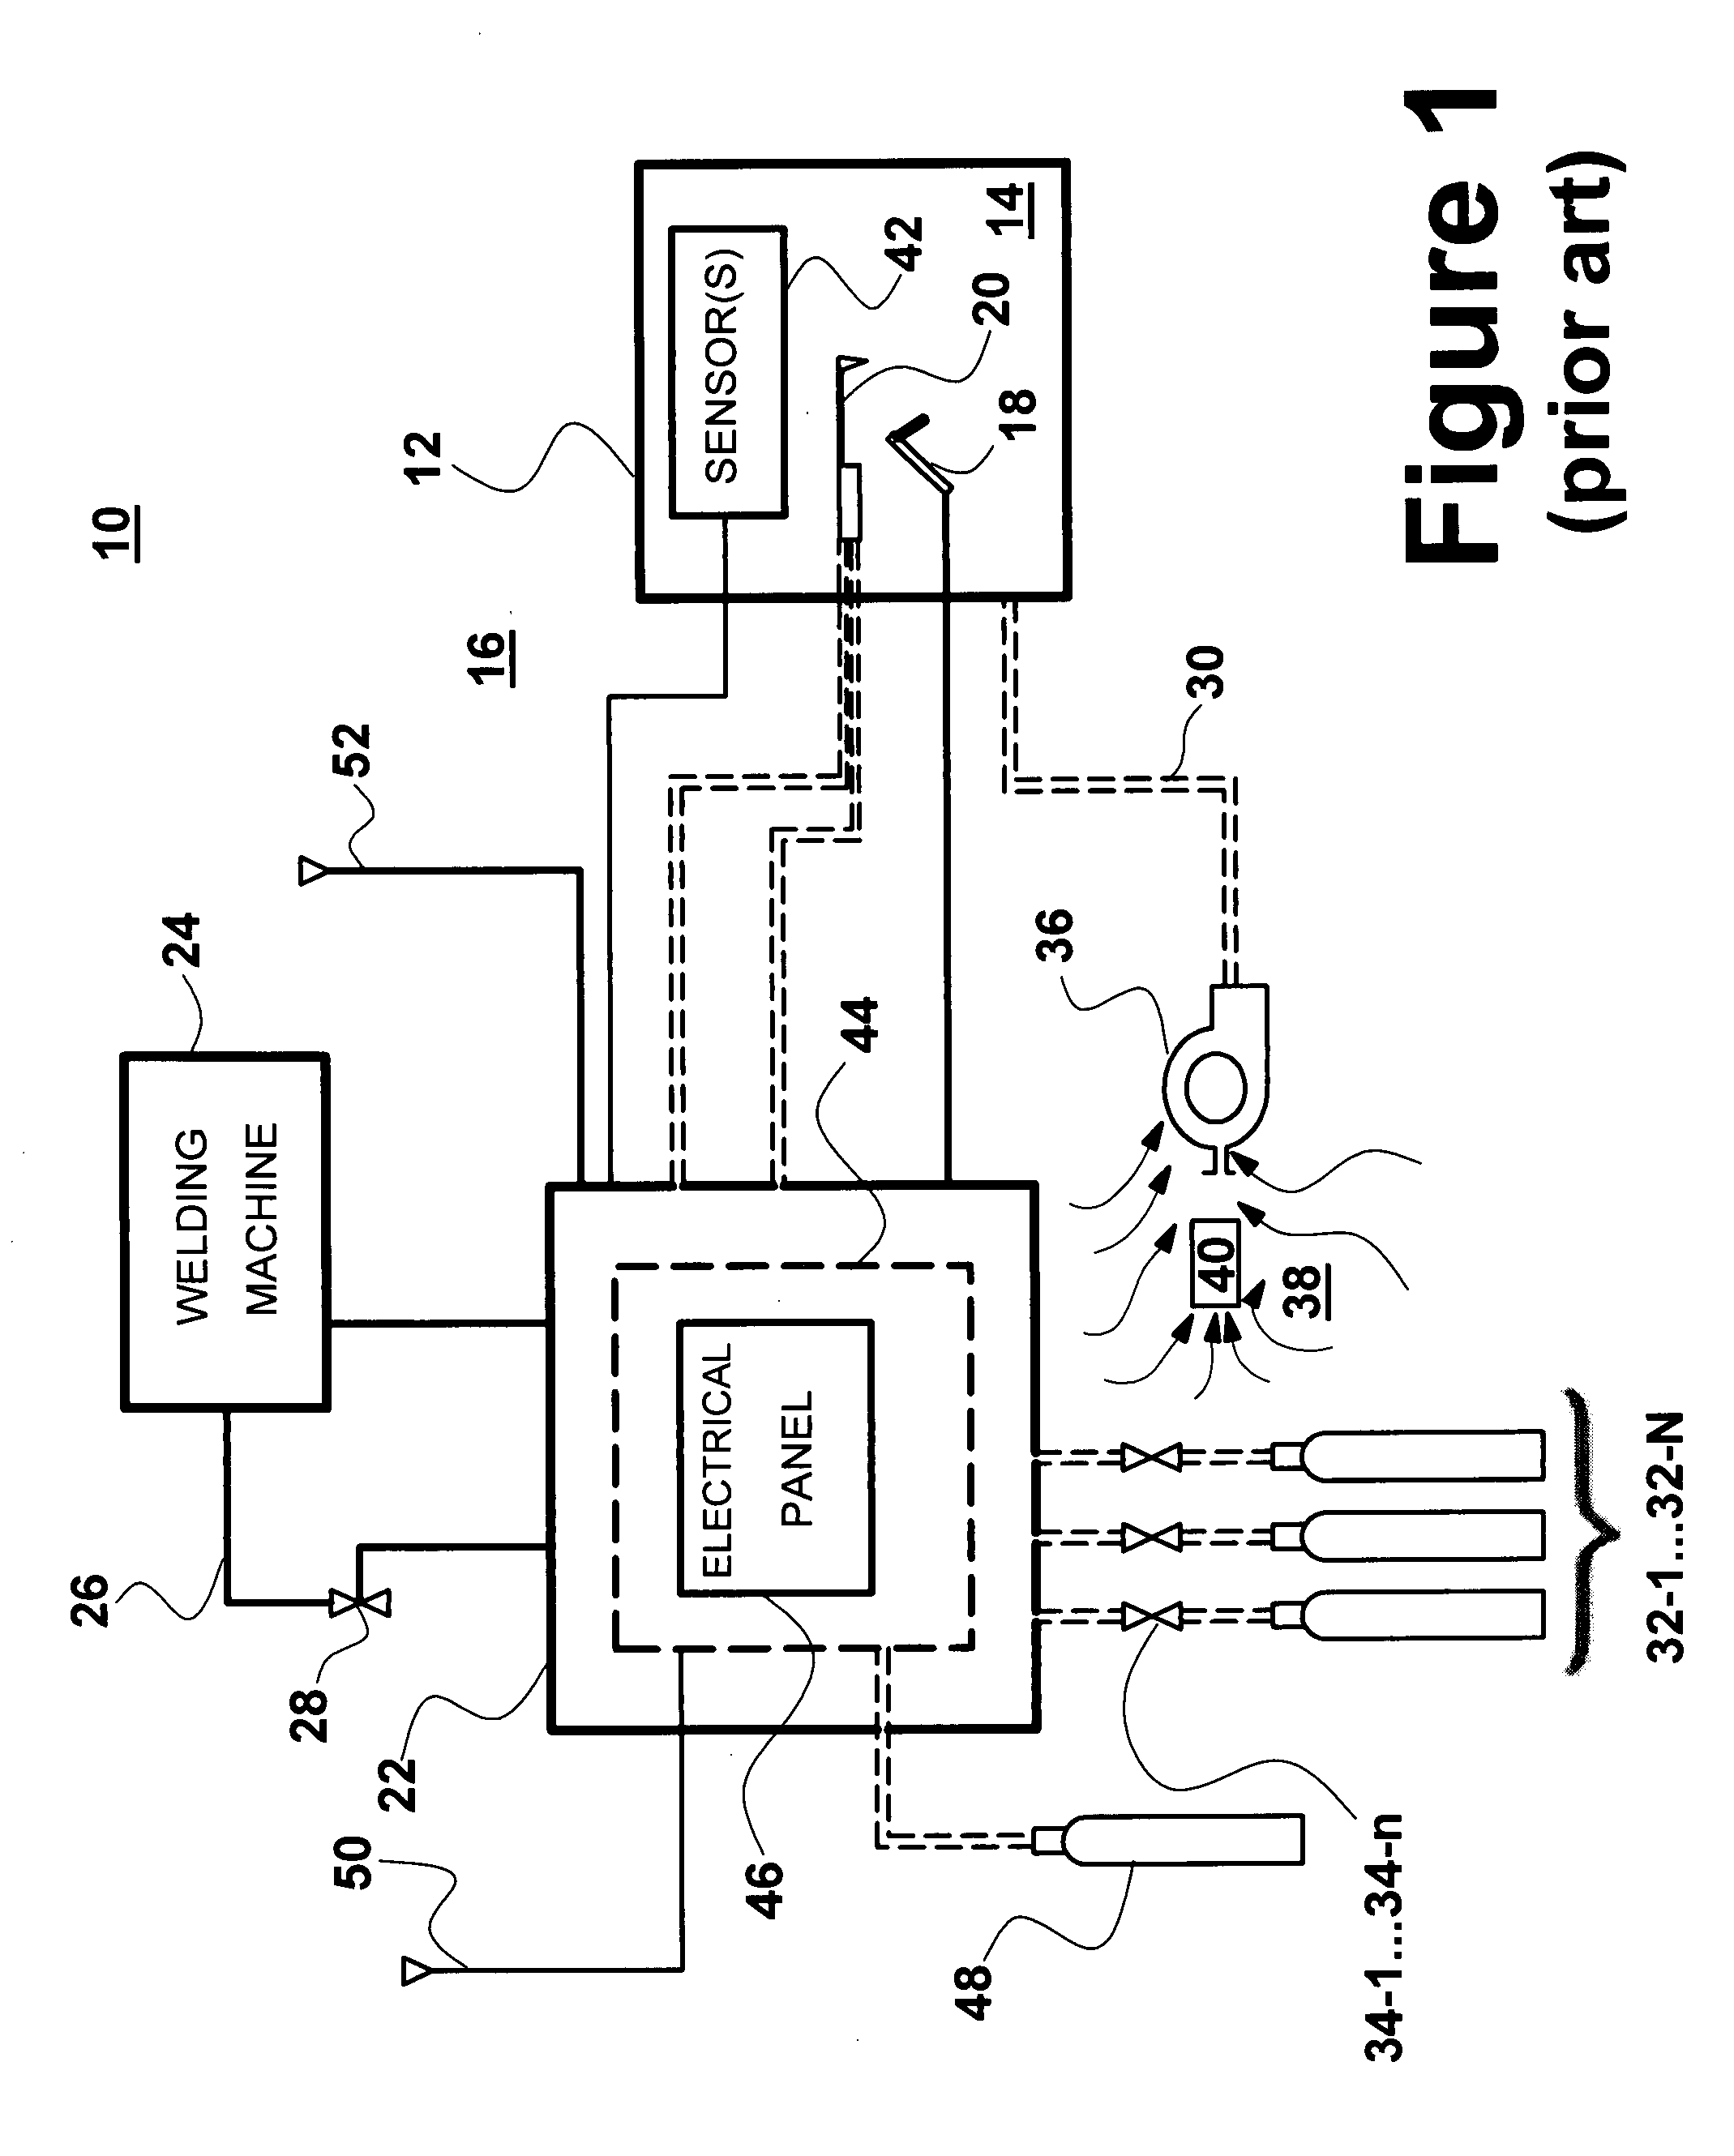 Workspace enclosure system with automatic shut-off